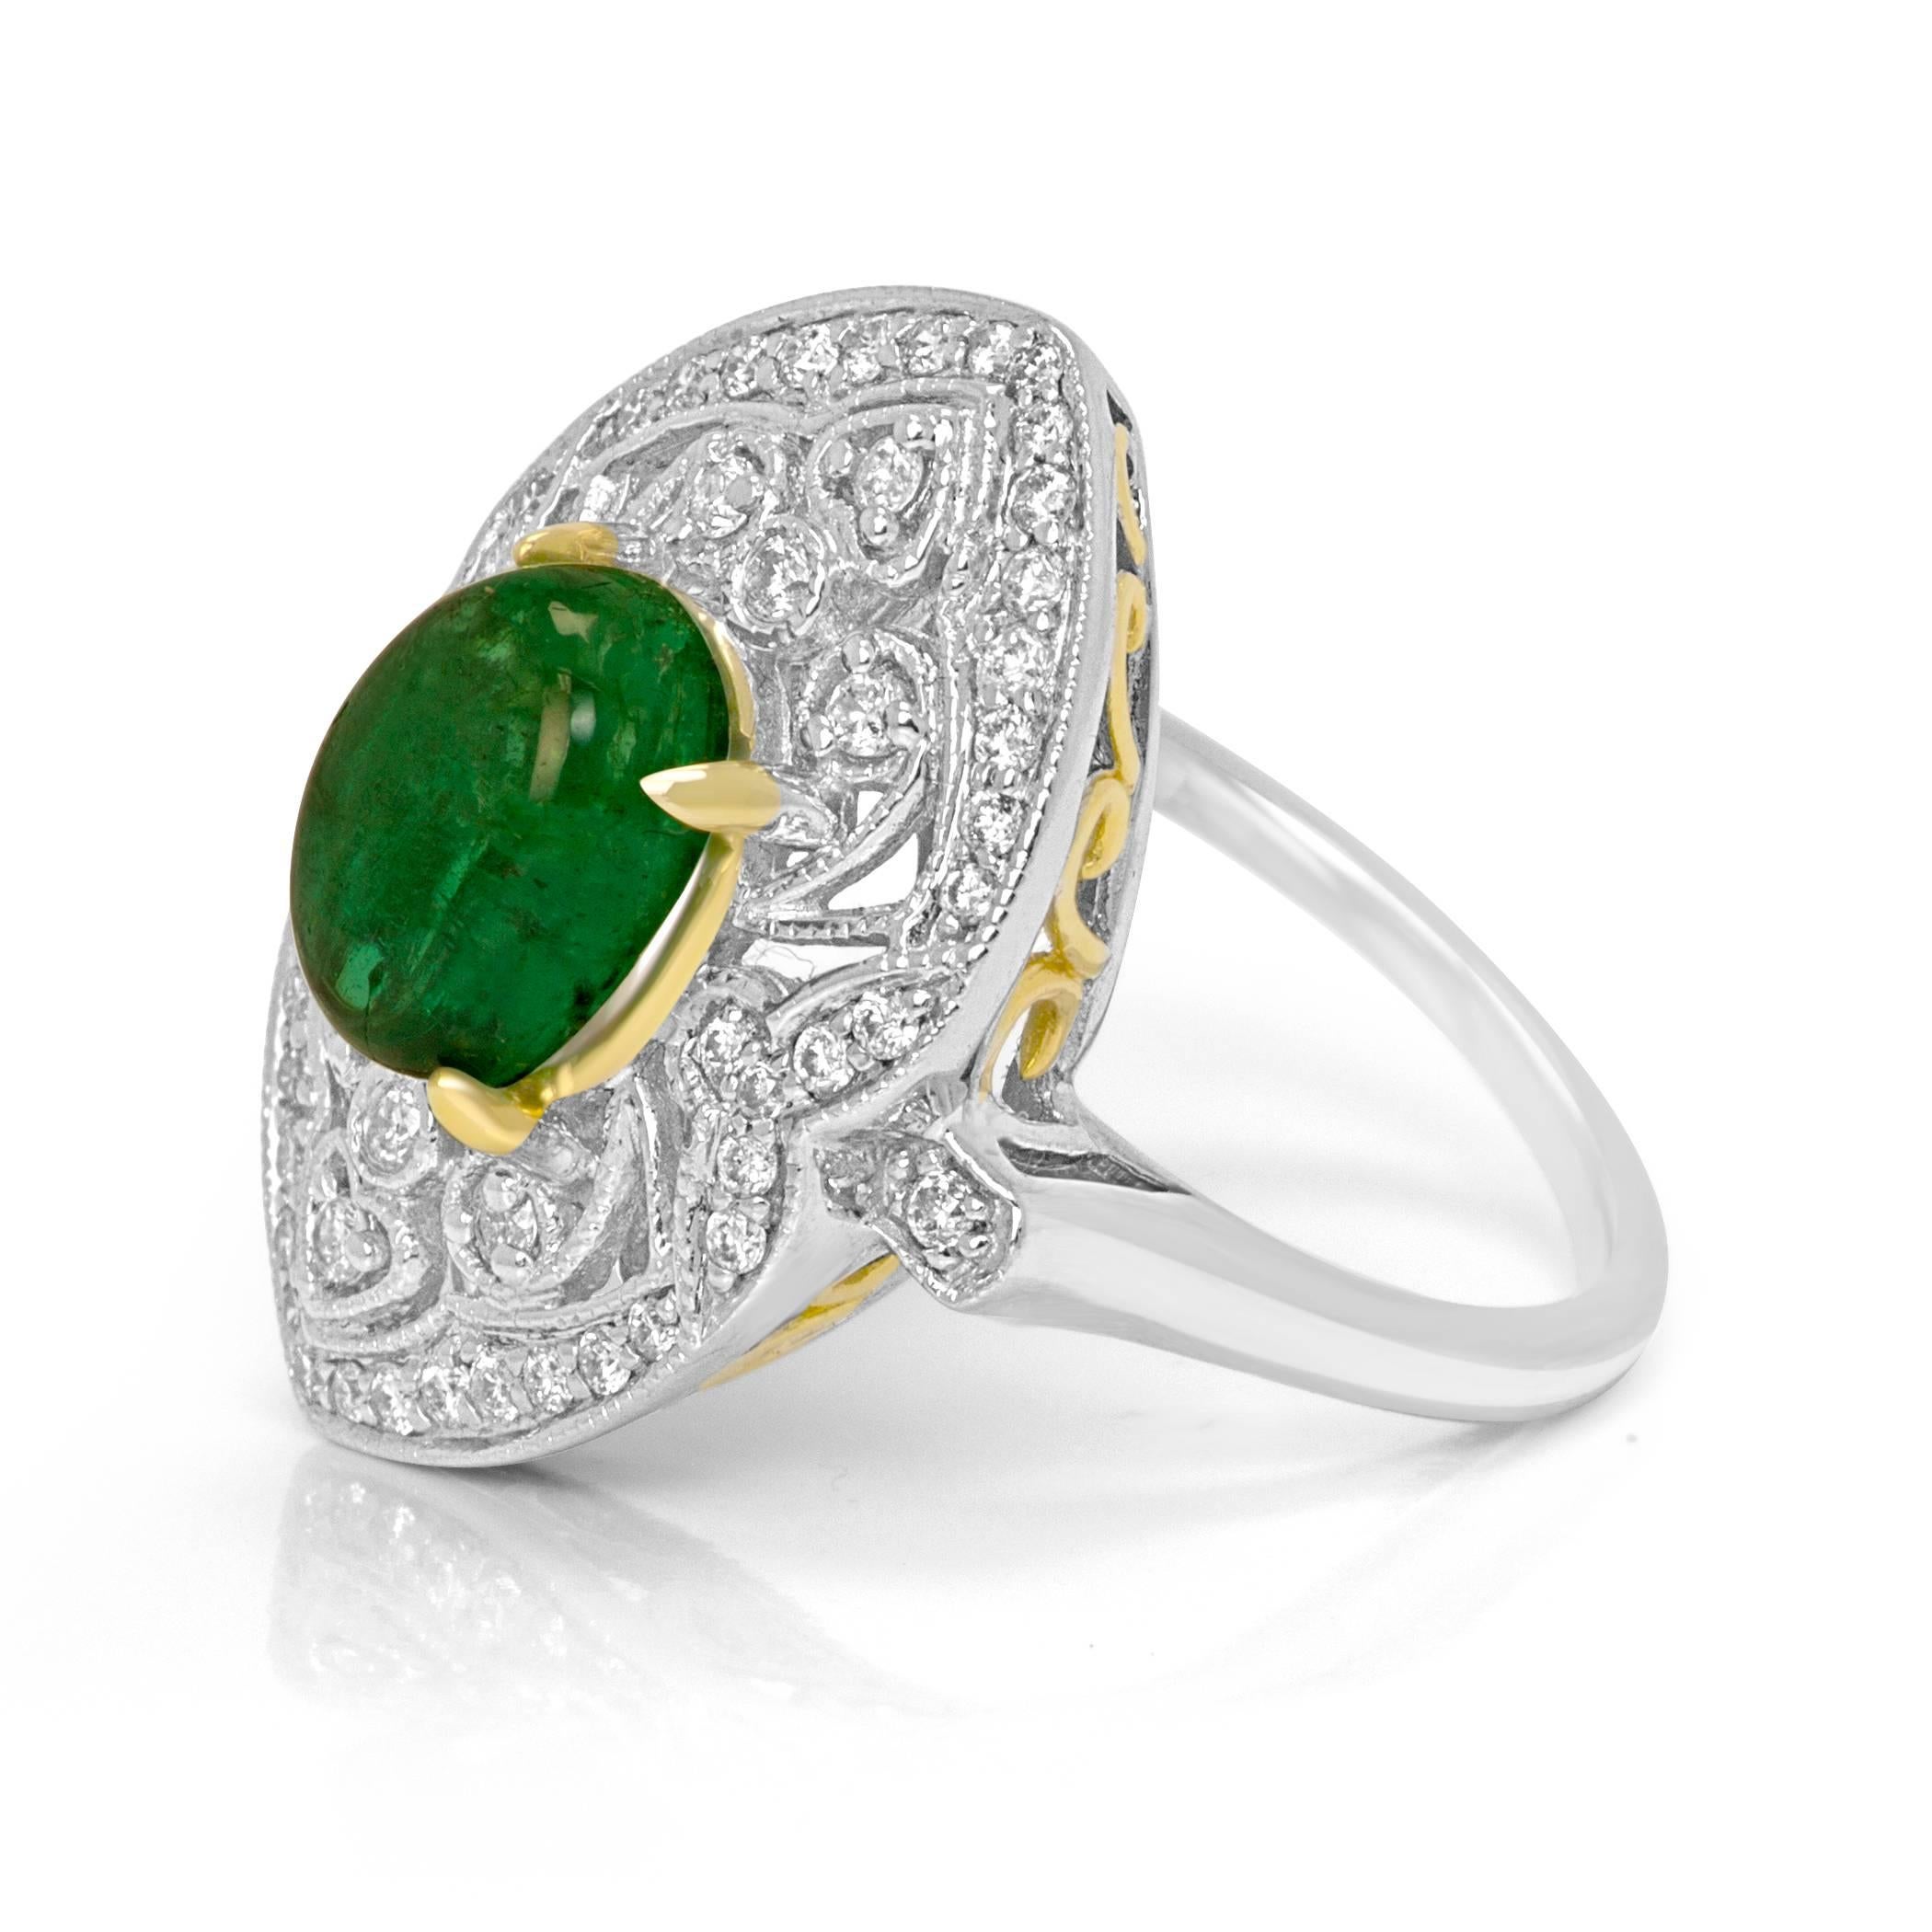 Emerald Oval Cabochon 2.03 Carat Encircled in White G-H Color SI Clarity Diamond round 0.45 Carat in 14k White and Yellow Gold  Art Deco style Fashion Cocktail Ring. 

Style available in different price ranges. Prices are based on your selection of